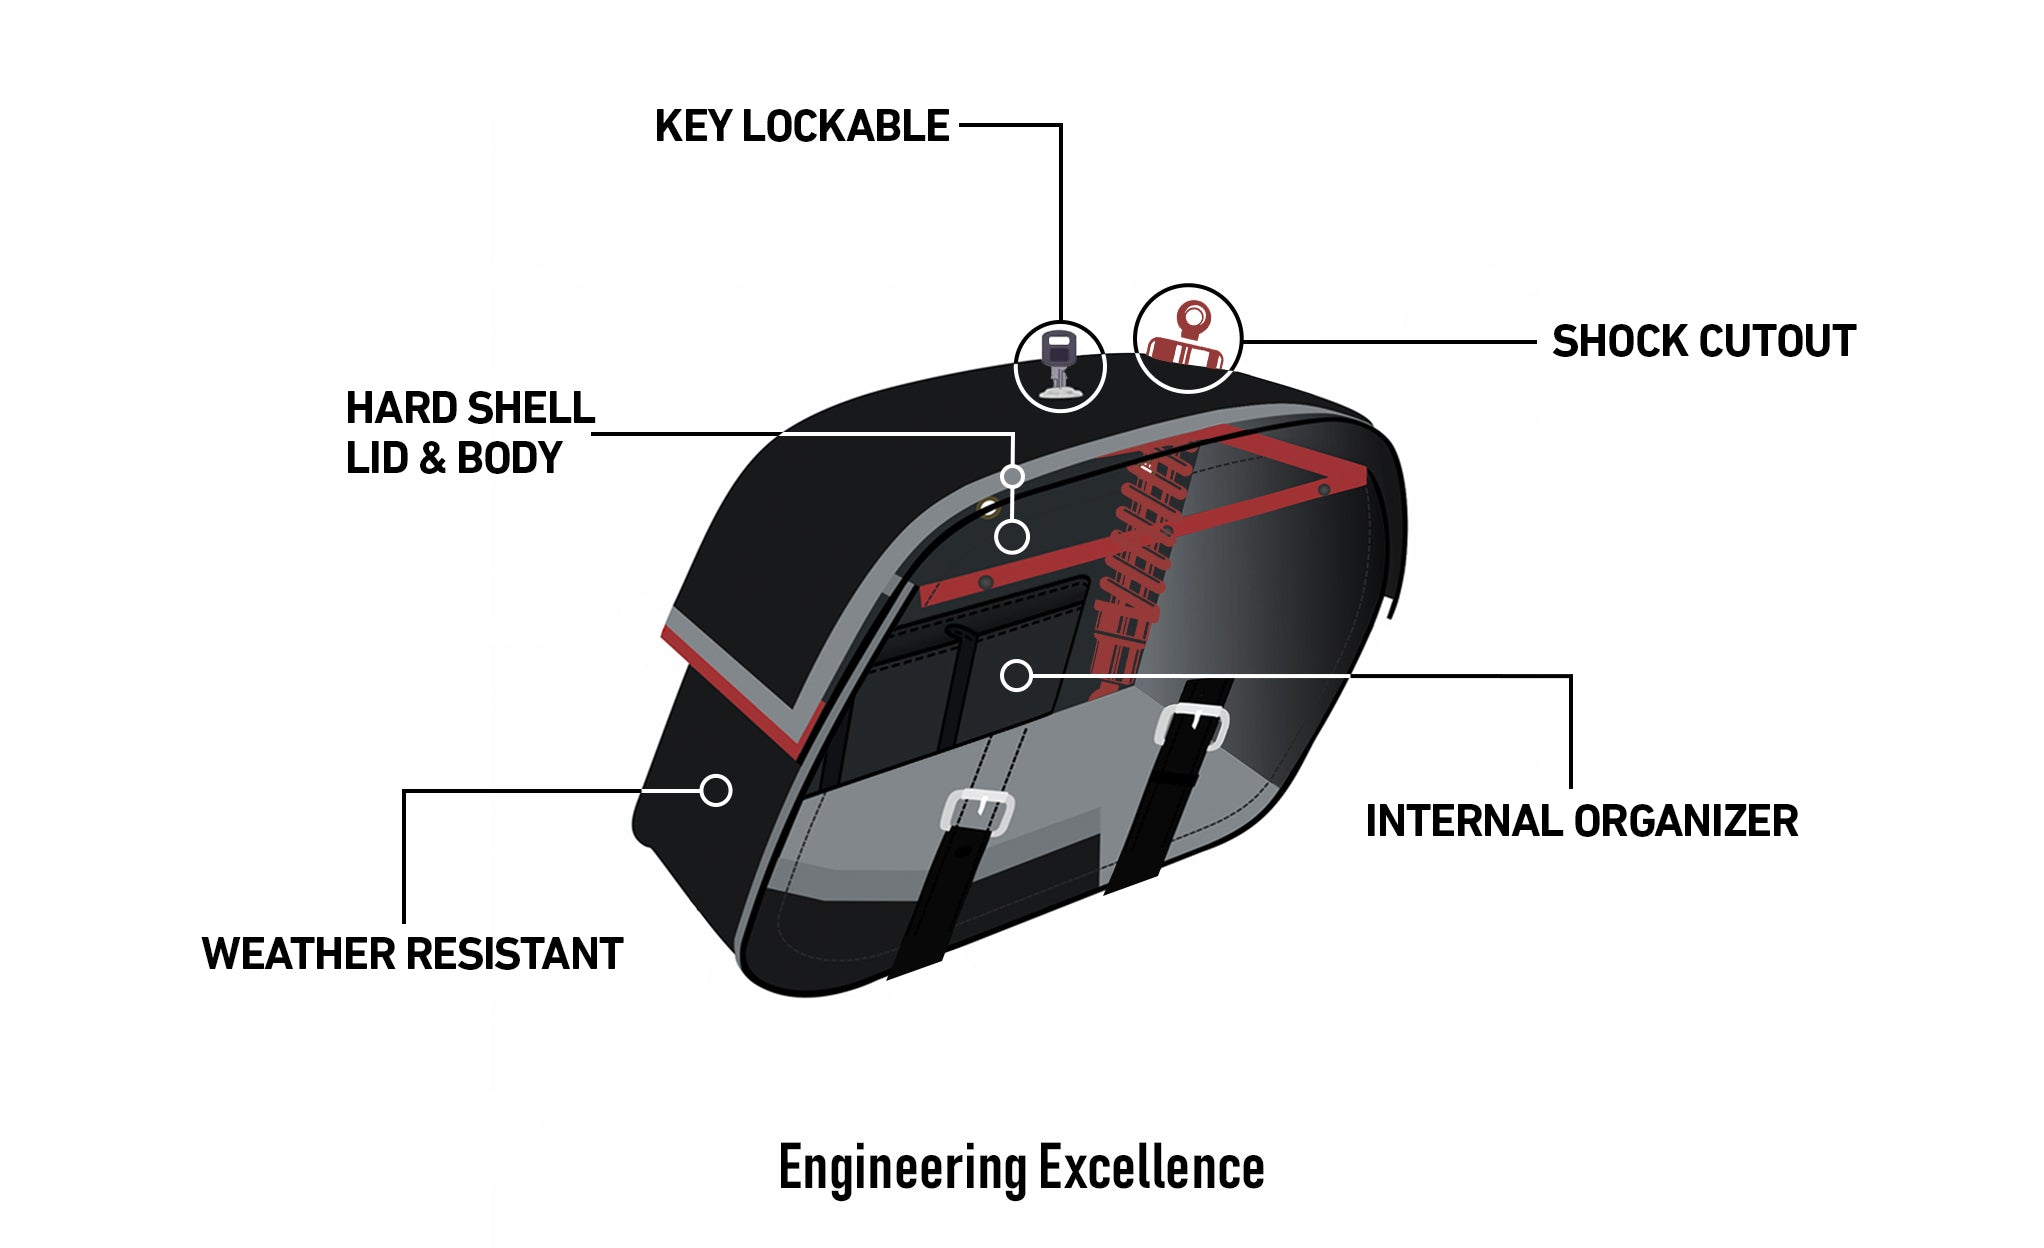 Viking Raven Extra Large Shock Cut Out Leather Motorcycle Saddlebags For Harley Dyna Super Glide Fxd I Engineering Excellence with Bag on Bike @expand